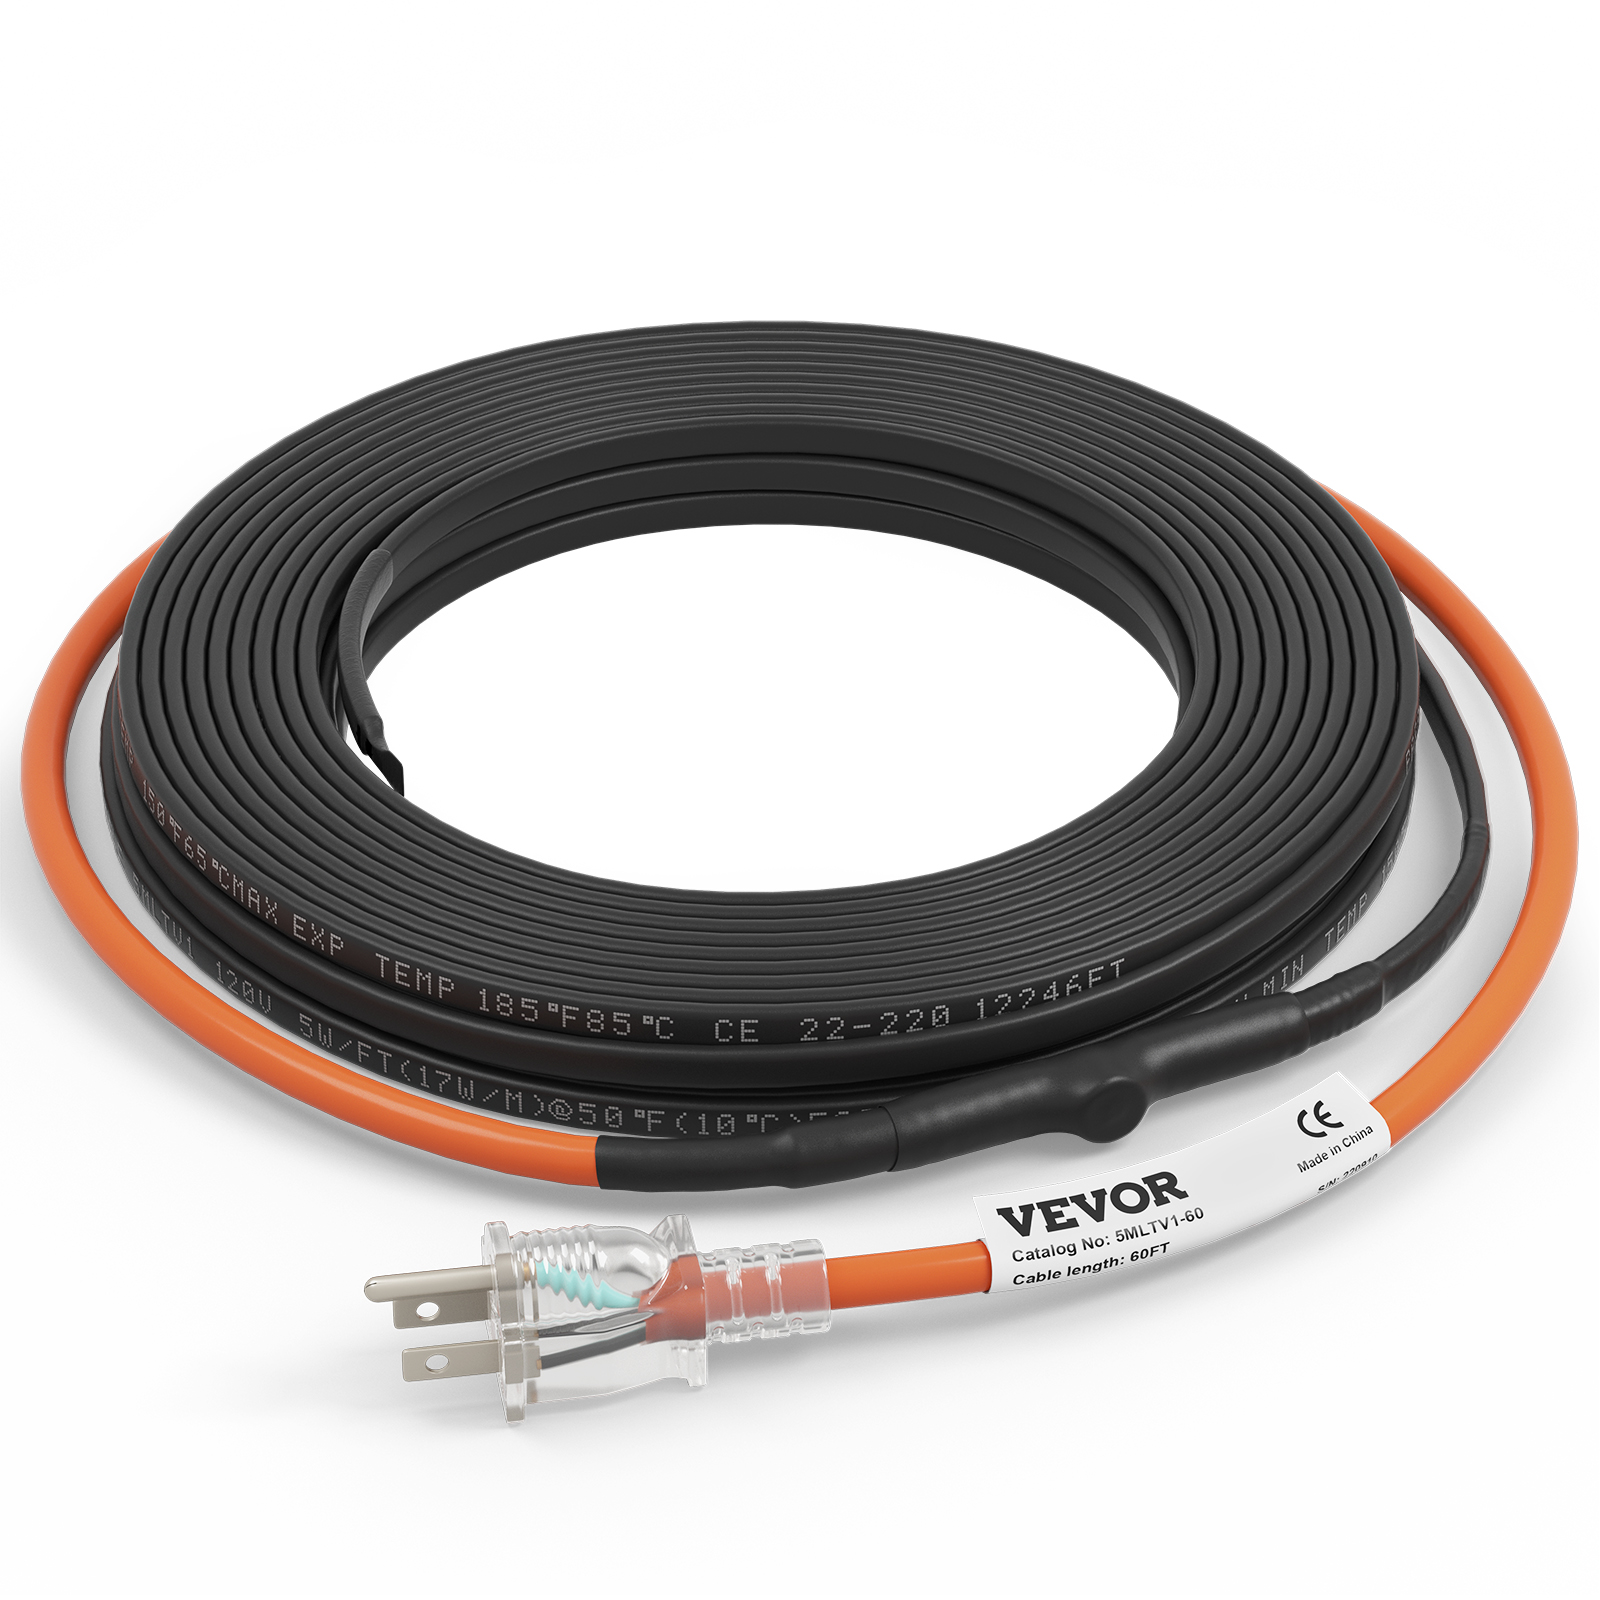 6Ft. 120V Heat Tape for Water Pipes, Self-Regulating Heating Cable for  Metal and